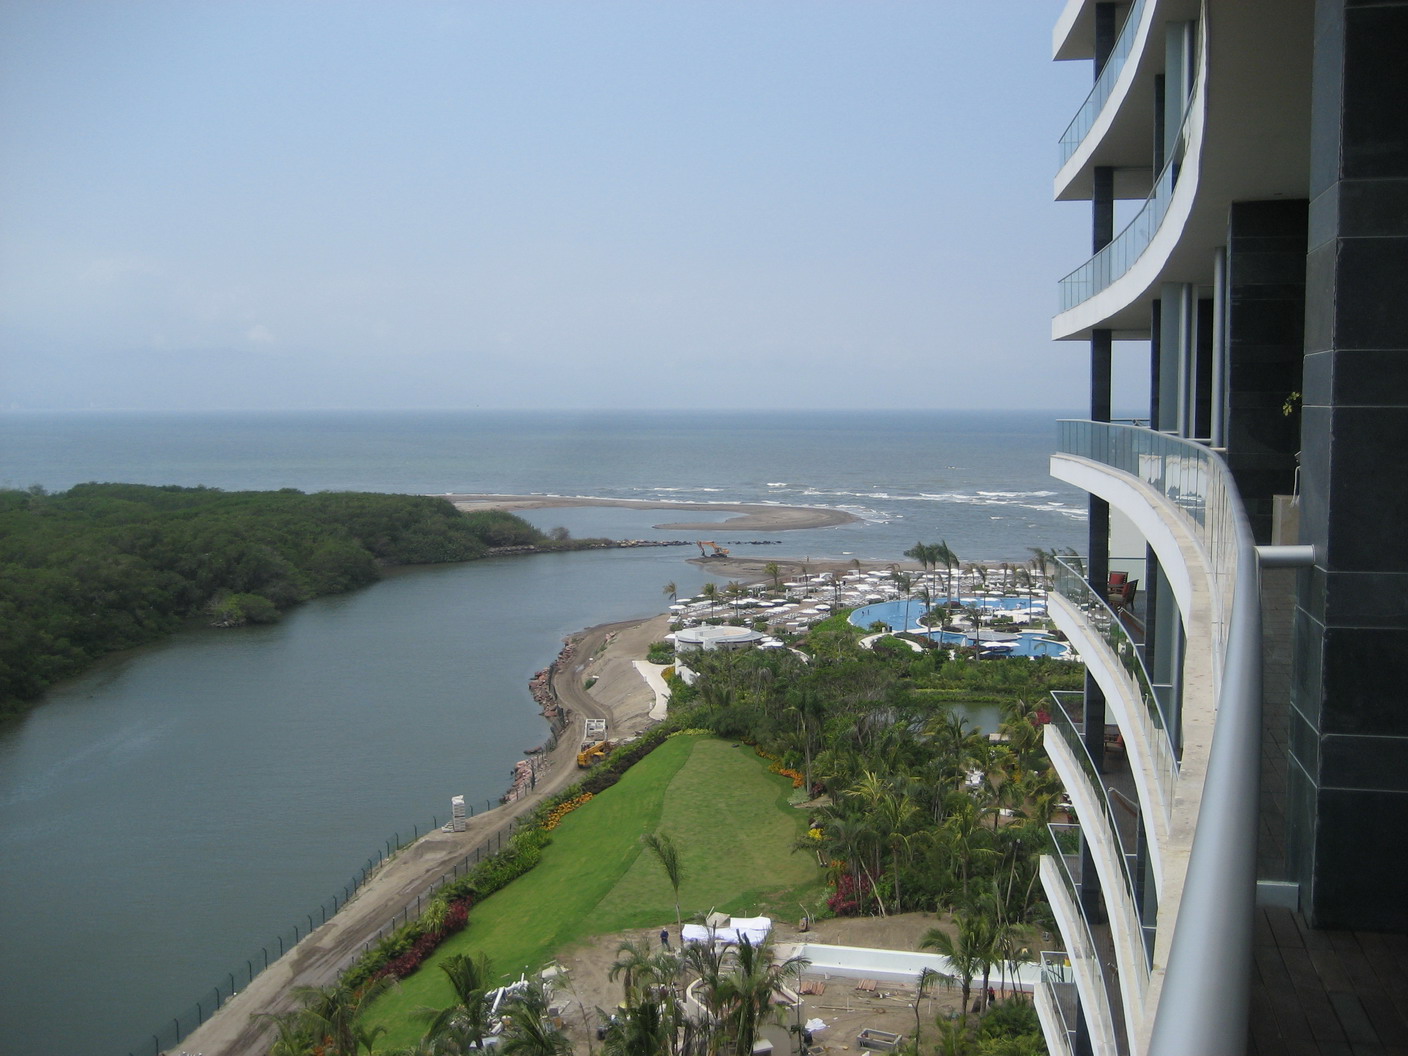 This photo shows a panoramic view of la punta beach.  The Ameca River meets the Bahia de Banderas a la punts (at the tip) de Nuevo Vallarta, where sand and rocks improve the beach in front of the Grand Luxxe Residence Club units.